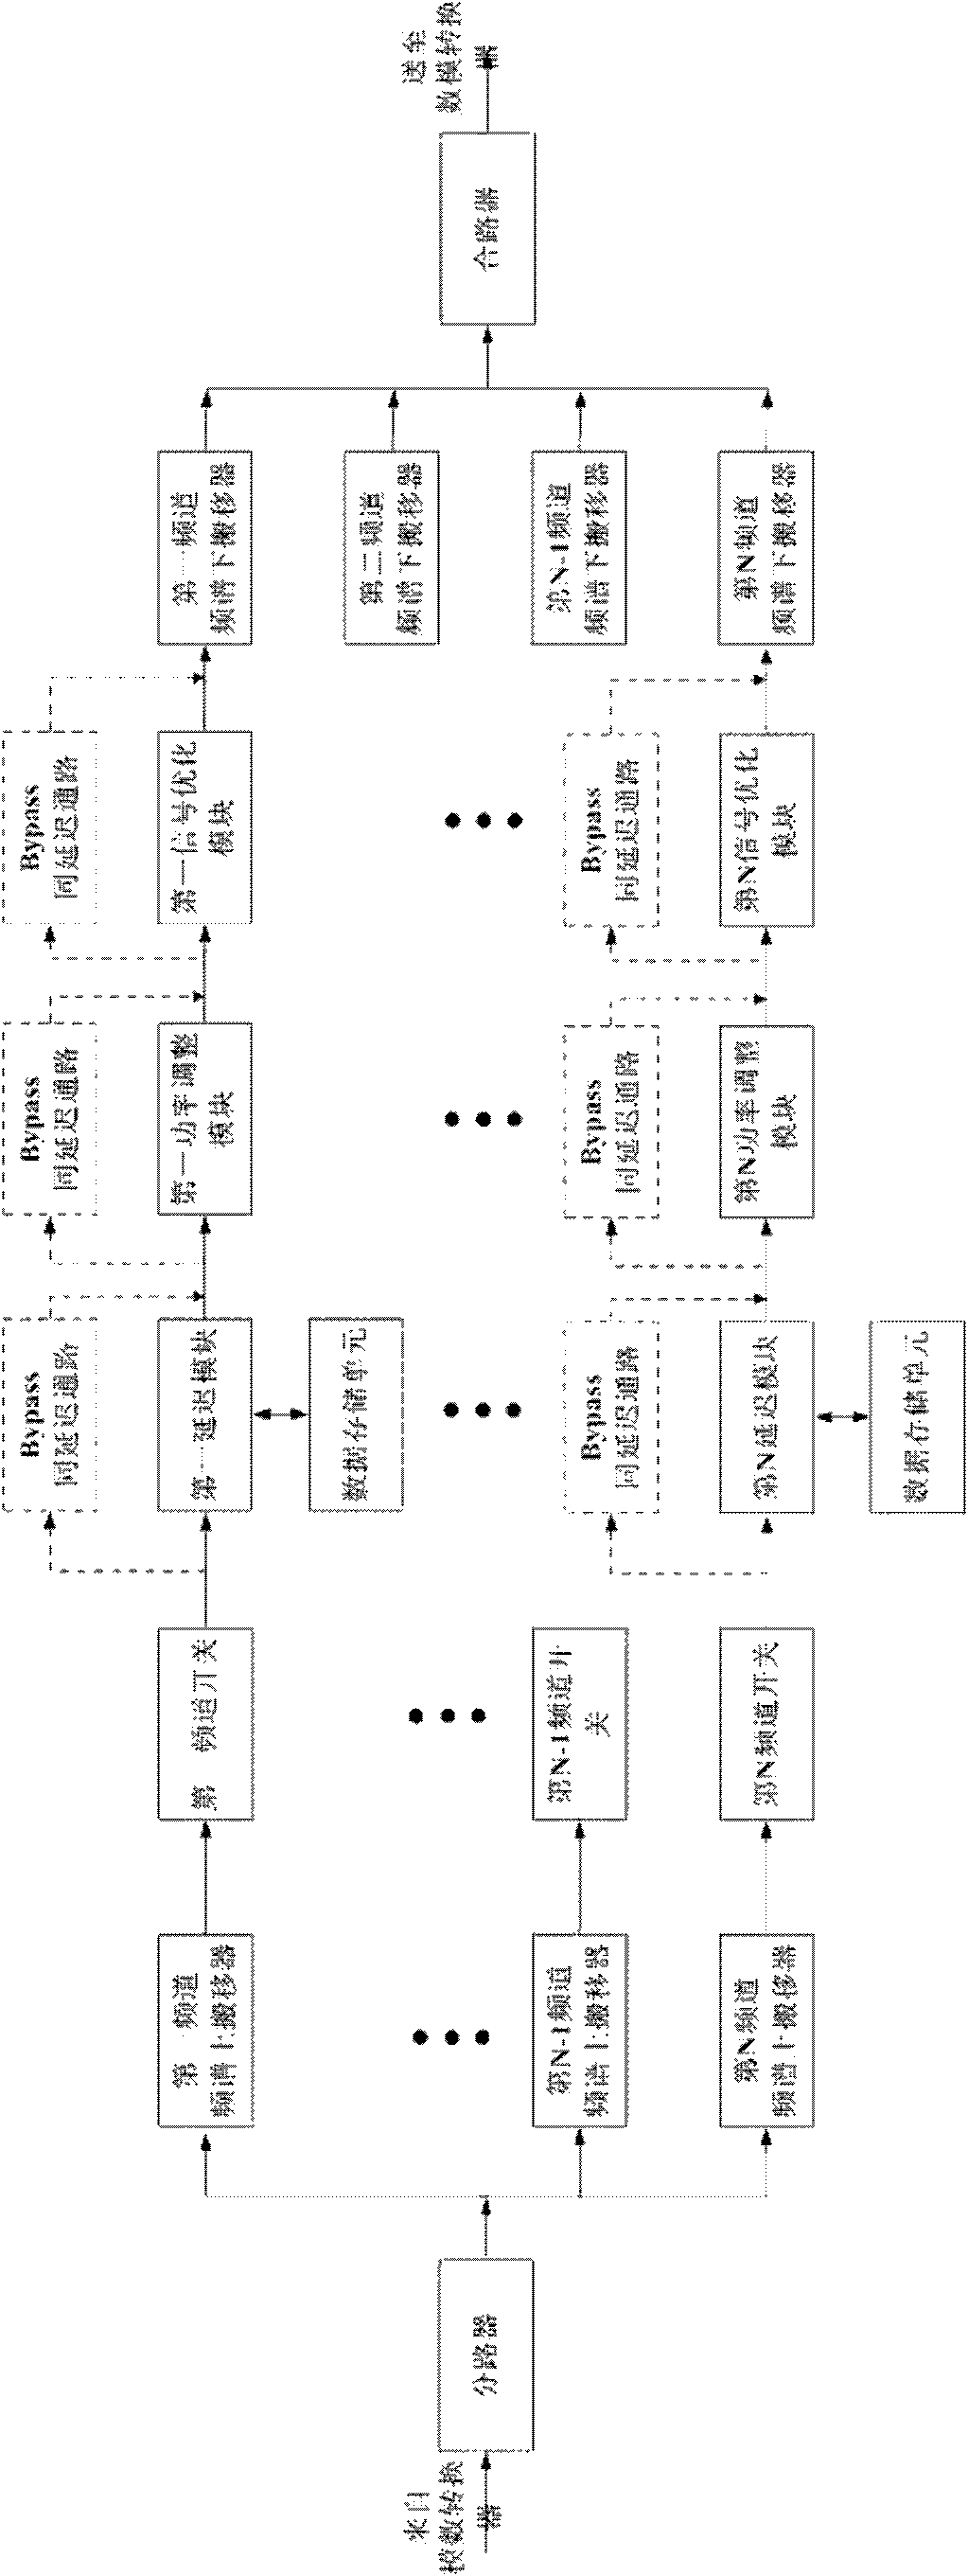 Multiple-channel radio-frequency signal adaptation system